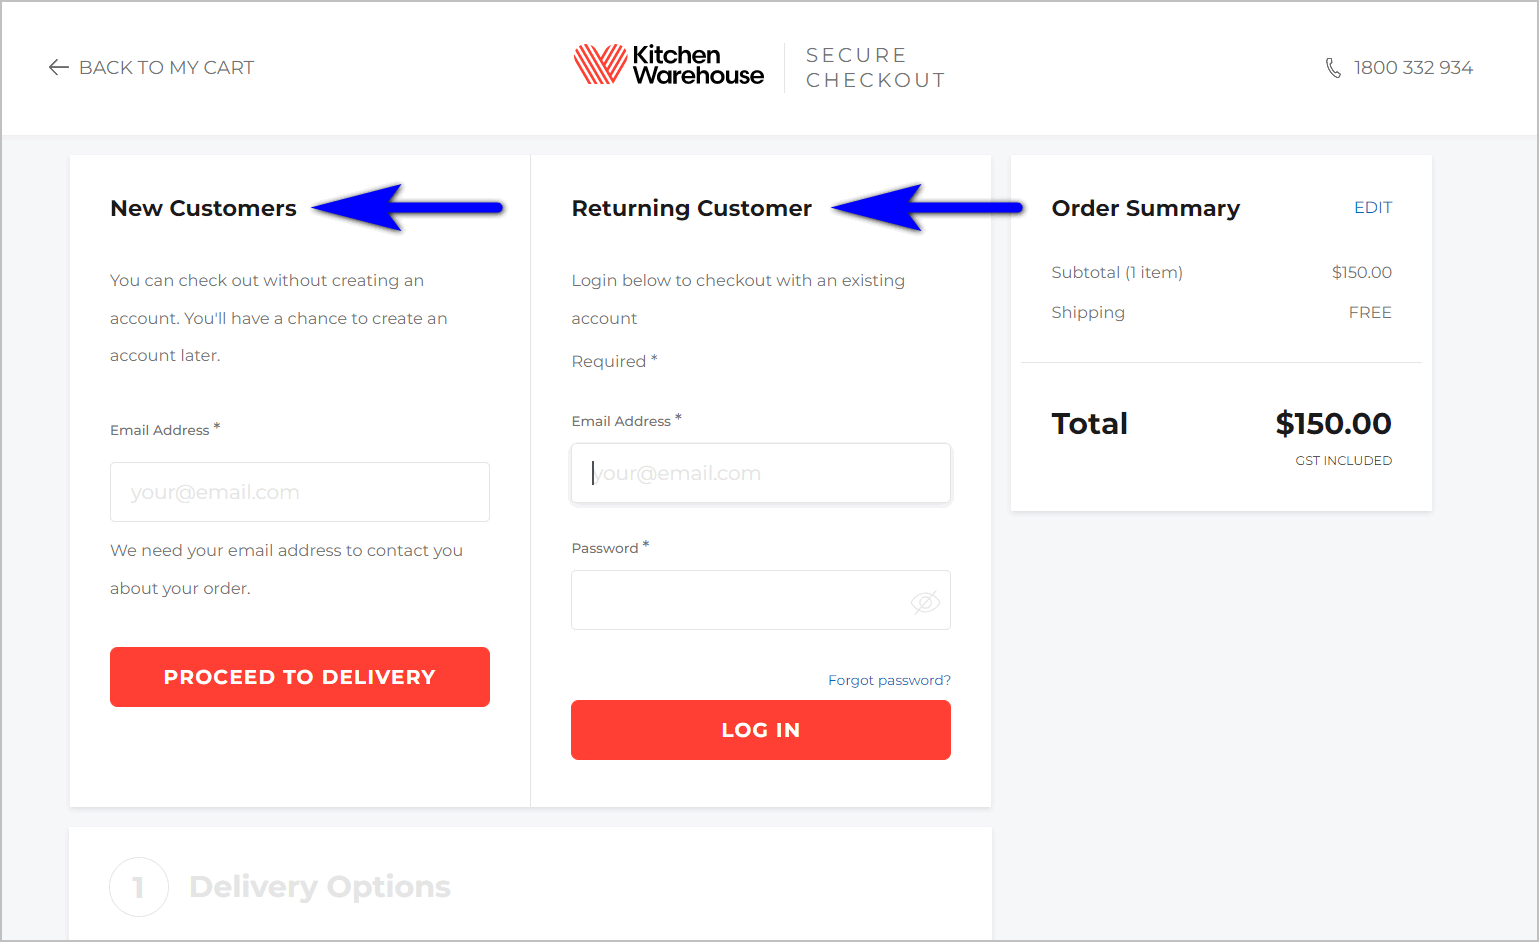 E-commerce guest checkout example – Kitchen Warehouse checkout page with separate sections for new and returning customers